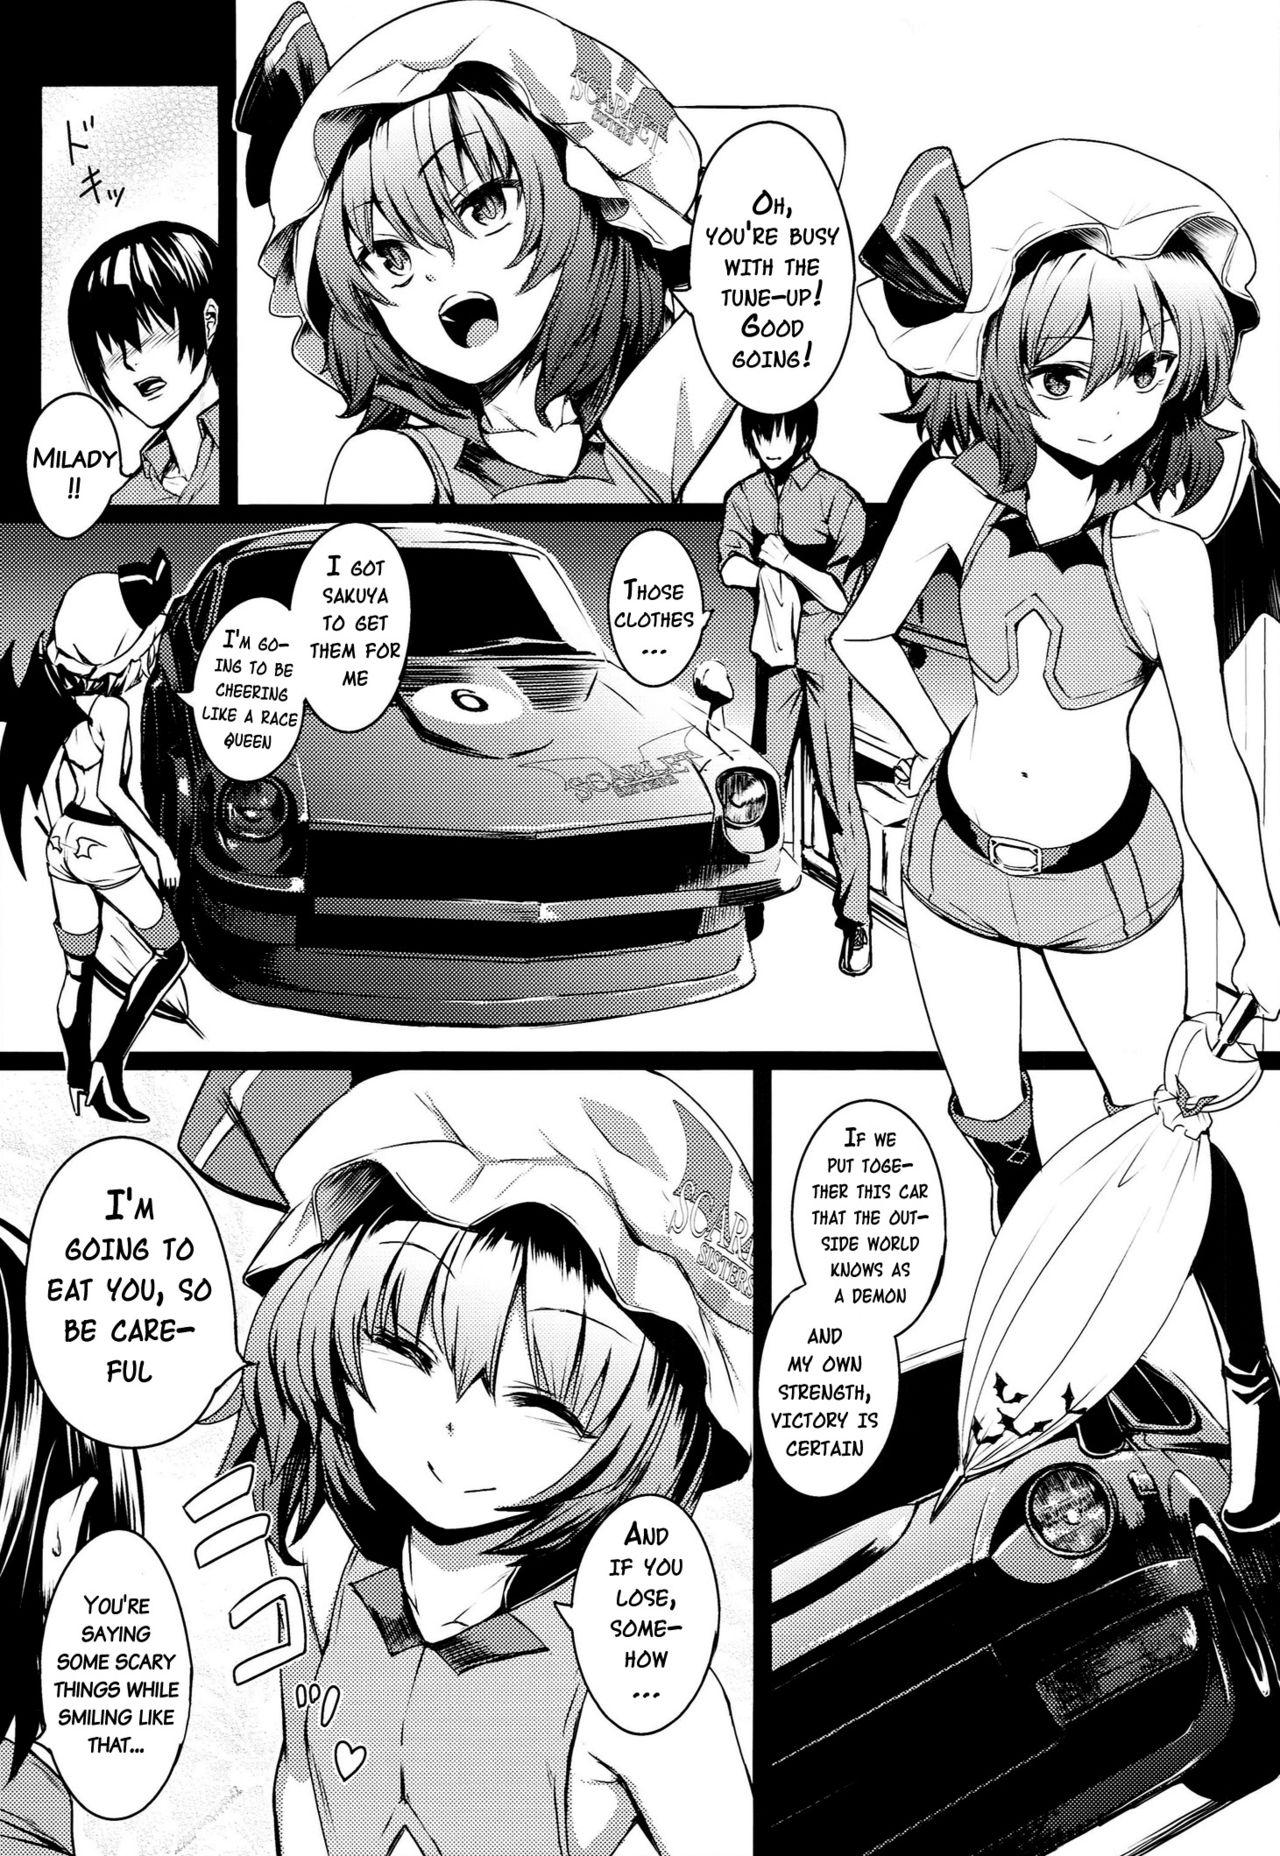 Facebook TOUHOU RACE QUEENS COLLABO CLUB - Touhou project Blowing - Page 4